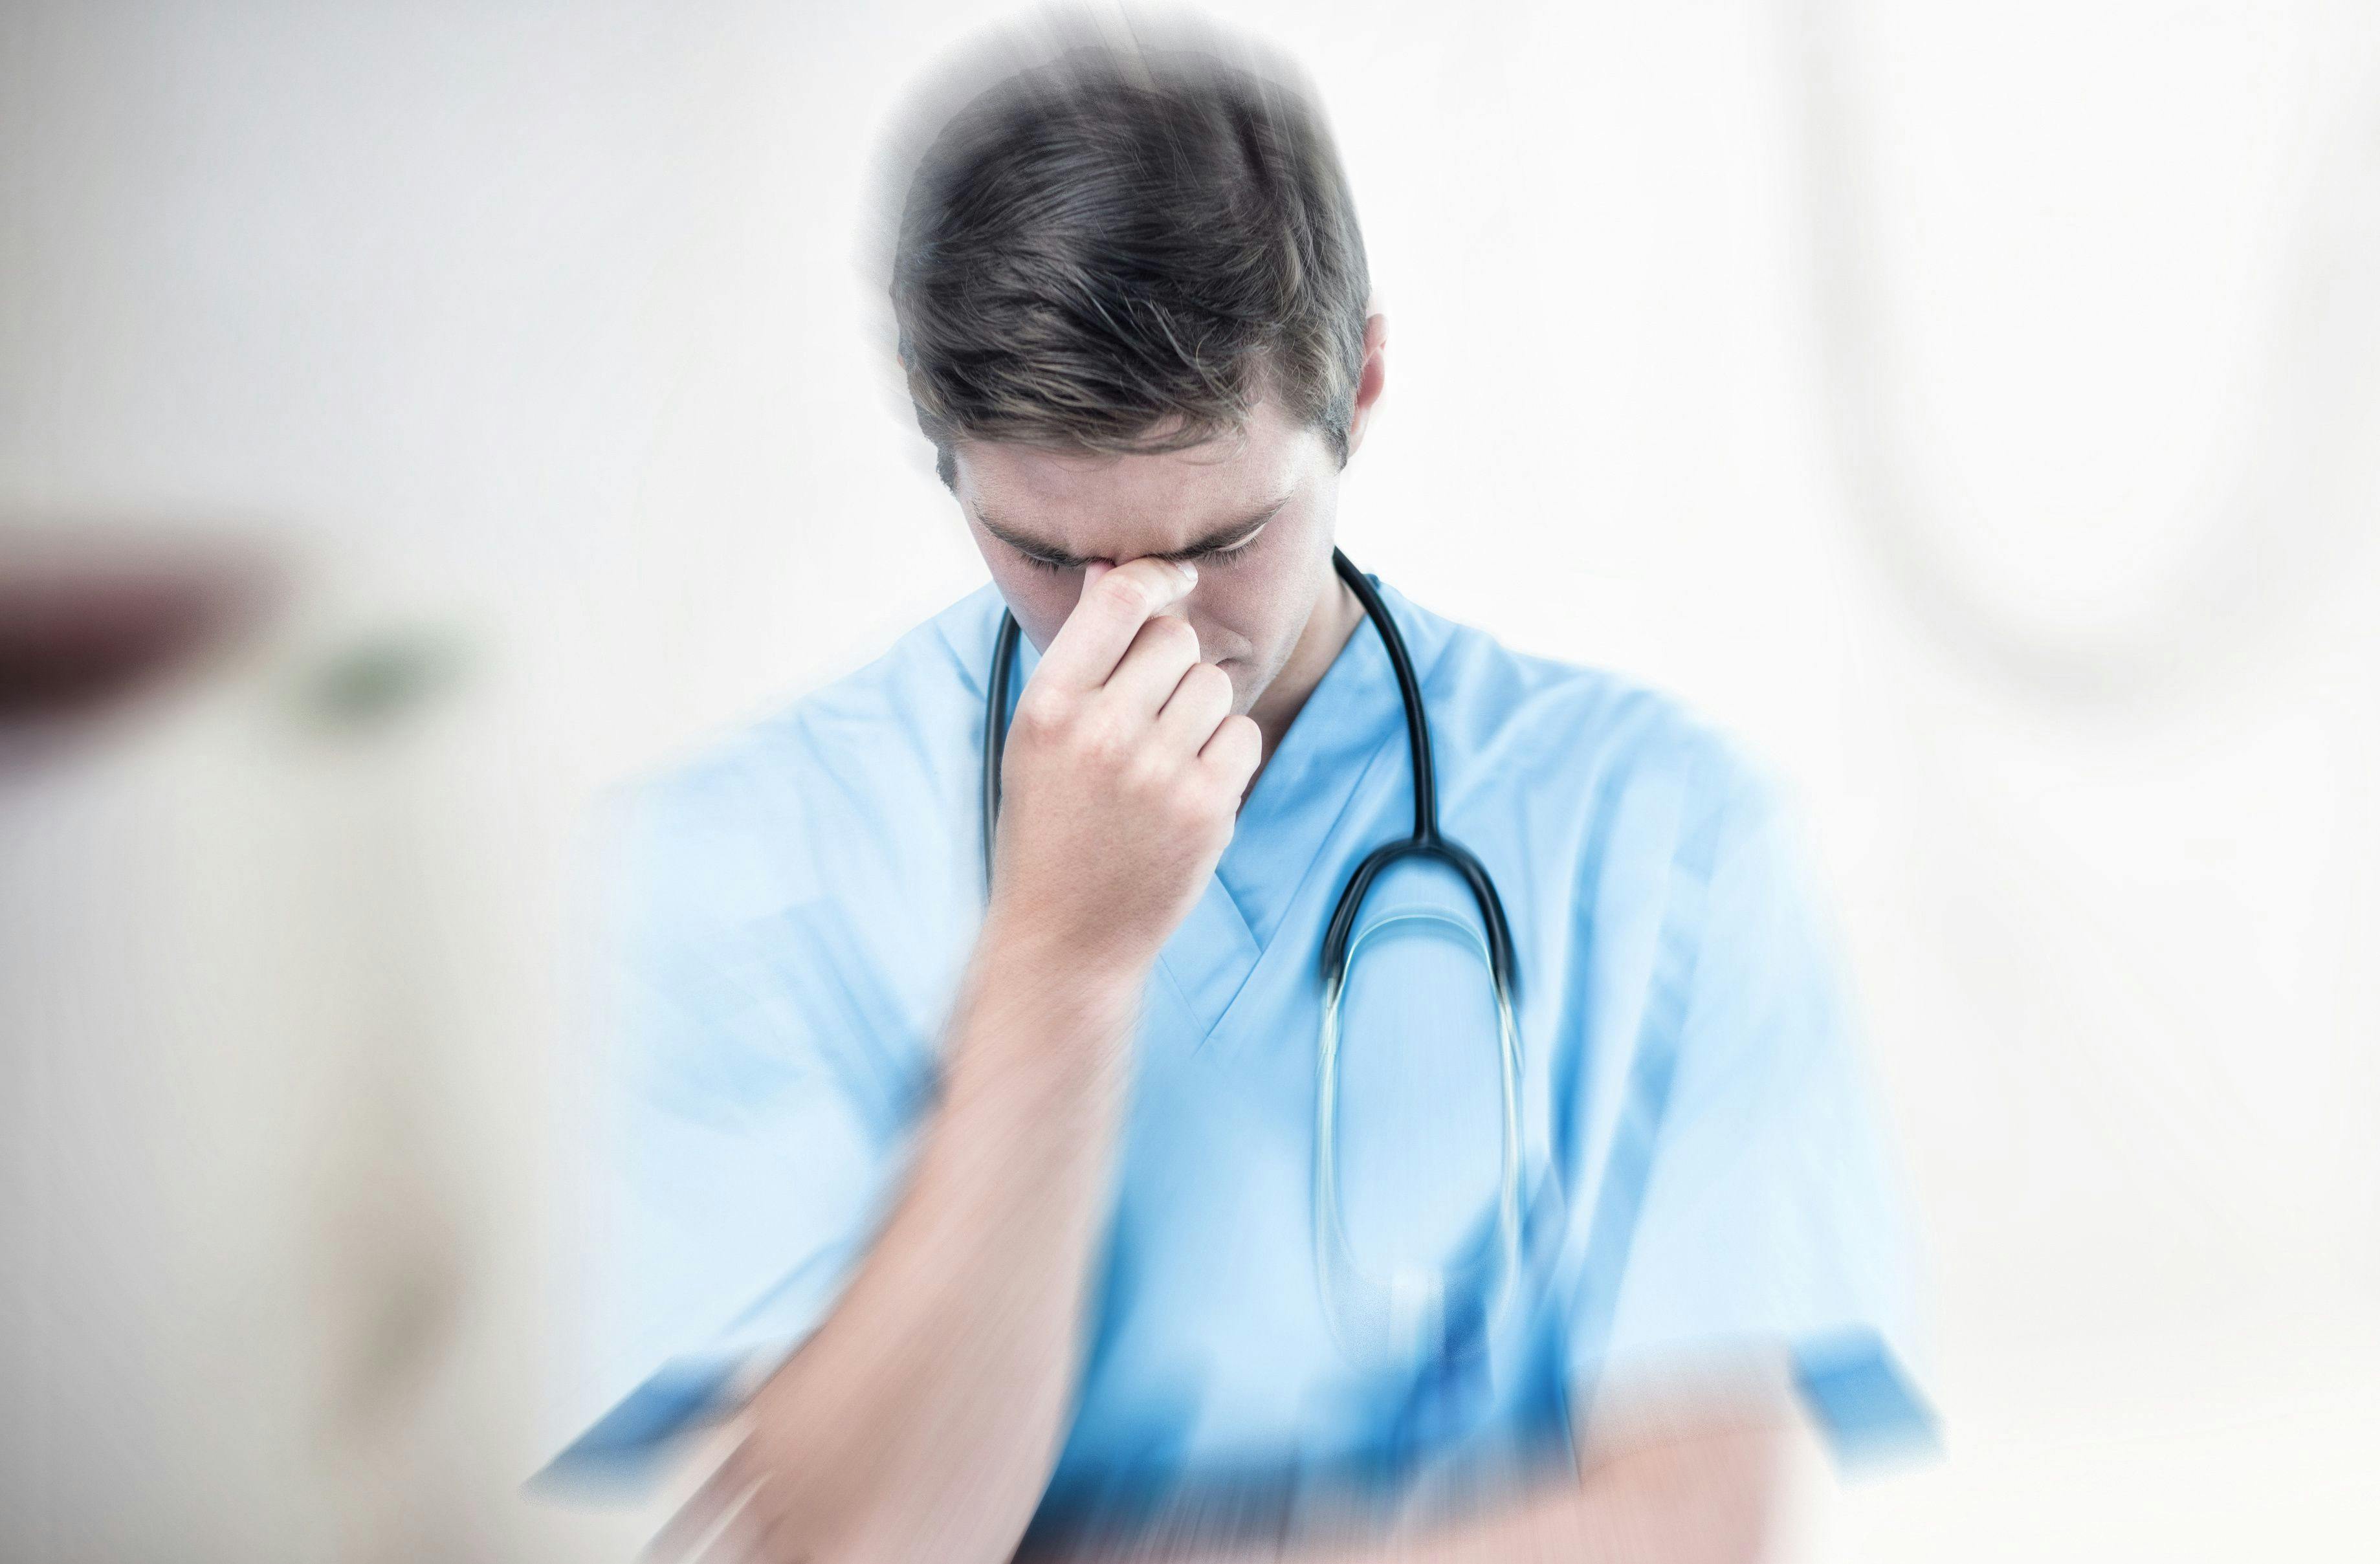 Male doctor suffering | Image Credit: vectorfusionart - stock.adobe.com